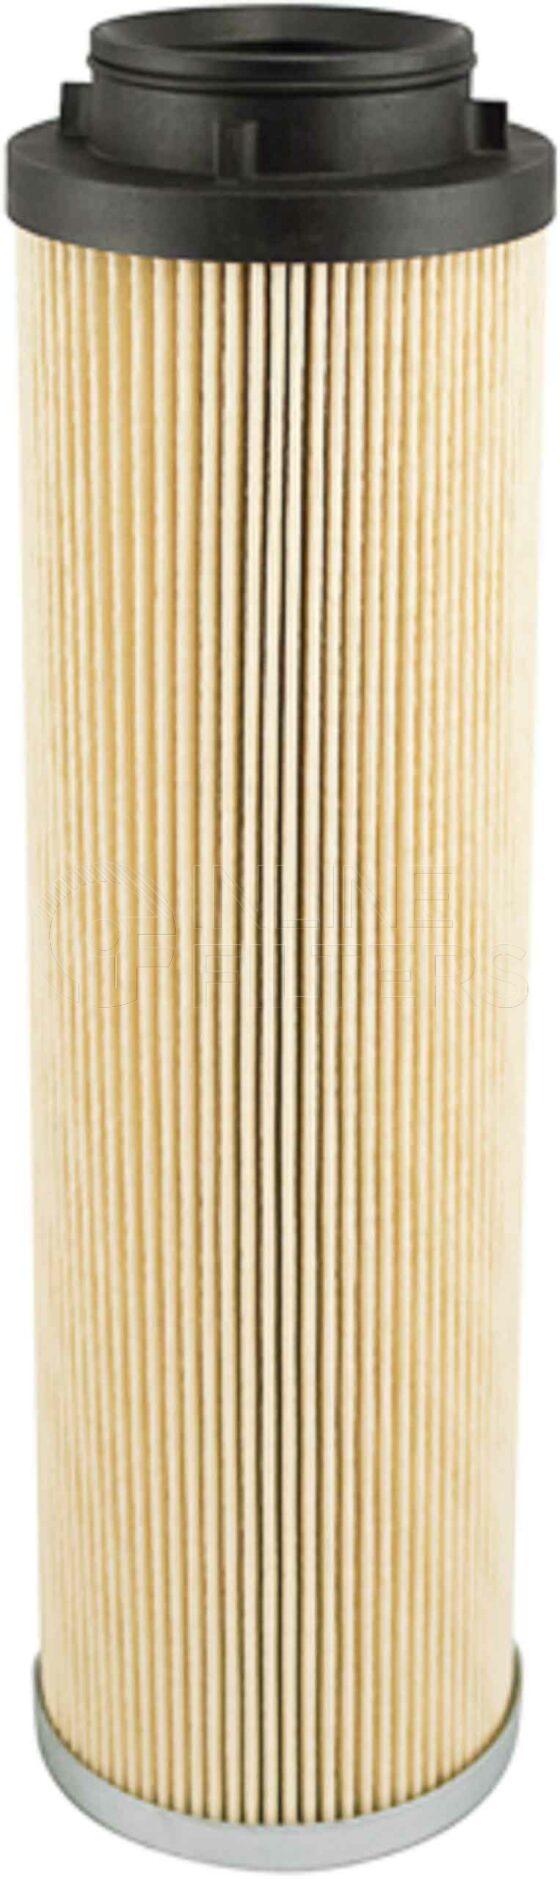 Baldwin PT9506. Hydraulic Filter Product – Brand Specific Baldwin – Cartridge Product Cartridge hydraulic filter element Hydraulic Element Notes OBSOLETE. Availability Limited to Dealer Stock. Replaces Parker G01101; Filtrec D731C10A Height 320.7 OD 91.3 ID 63.5 One End